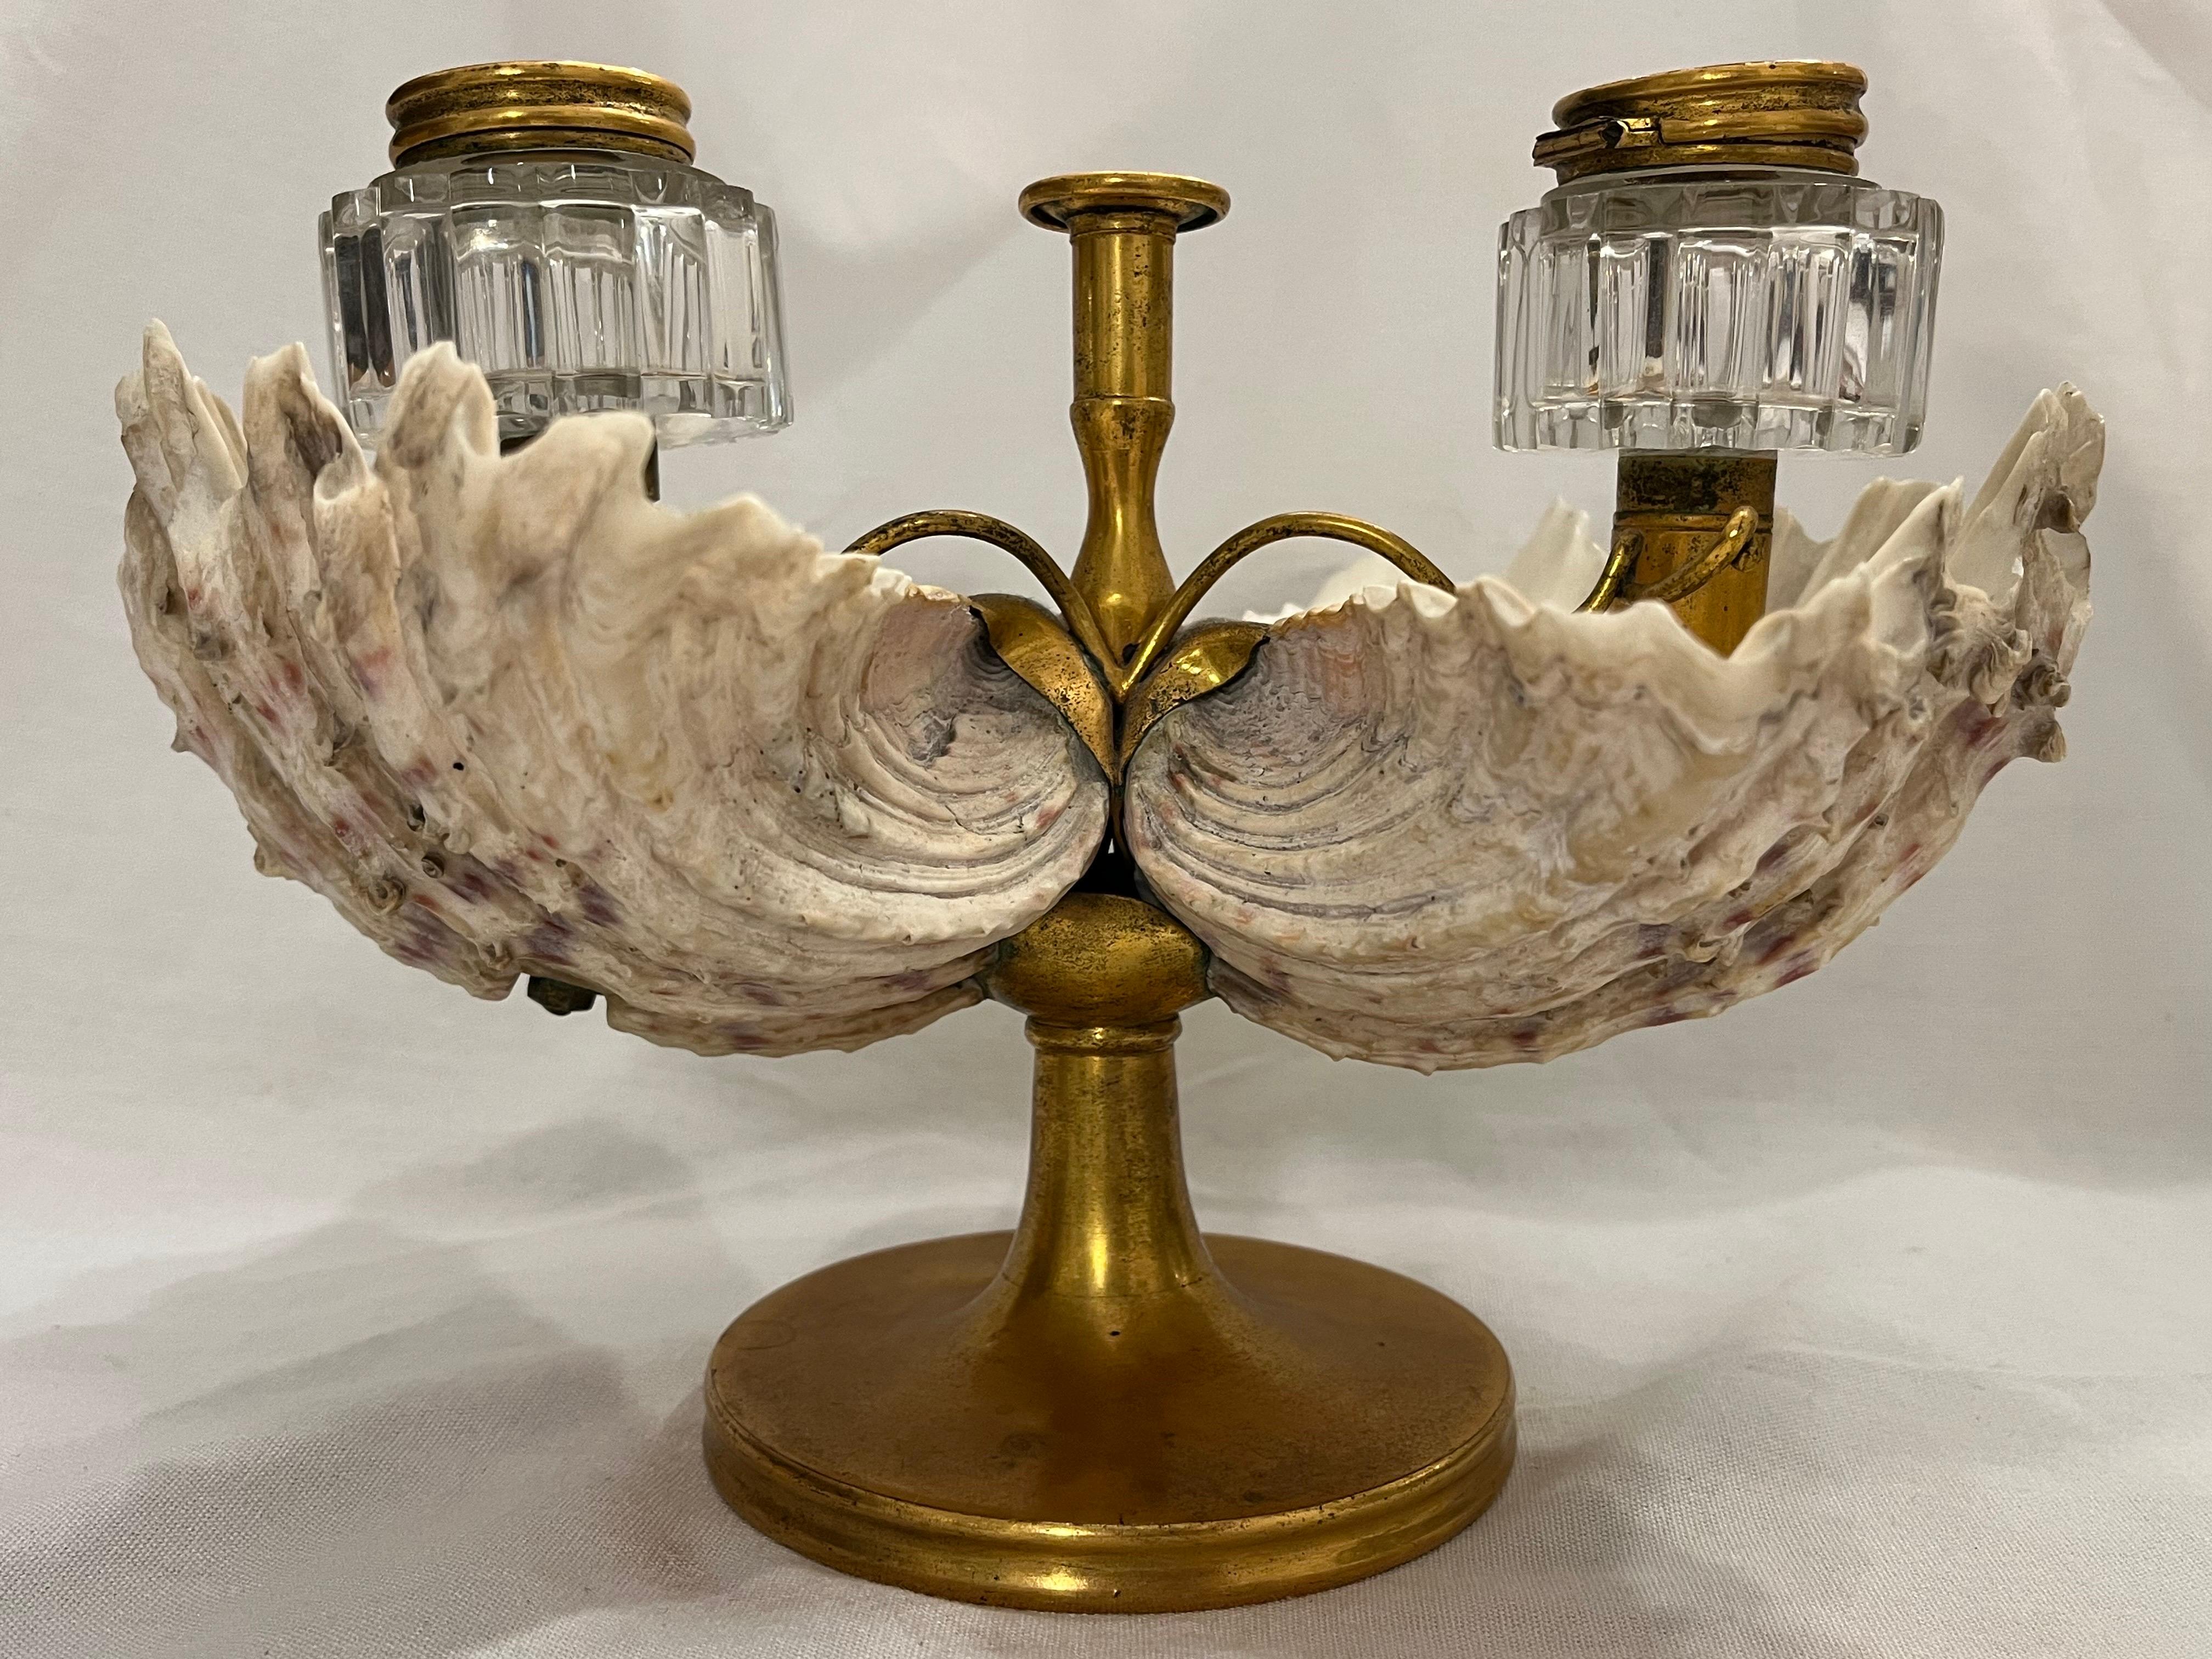 Antique William IV Shell Gilt Bronze Double Inkwell with Pen Rest Candle Stand For Sale 4